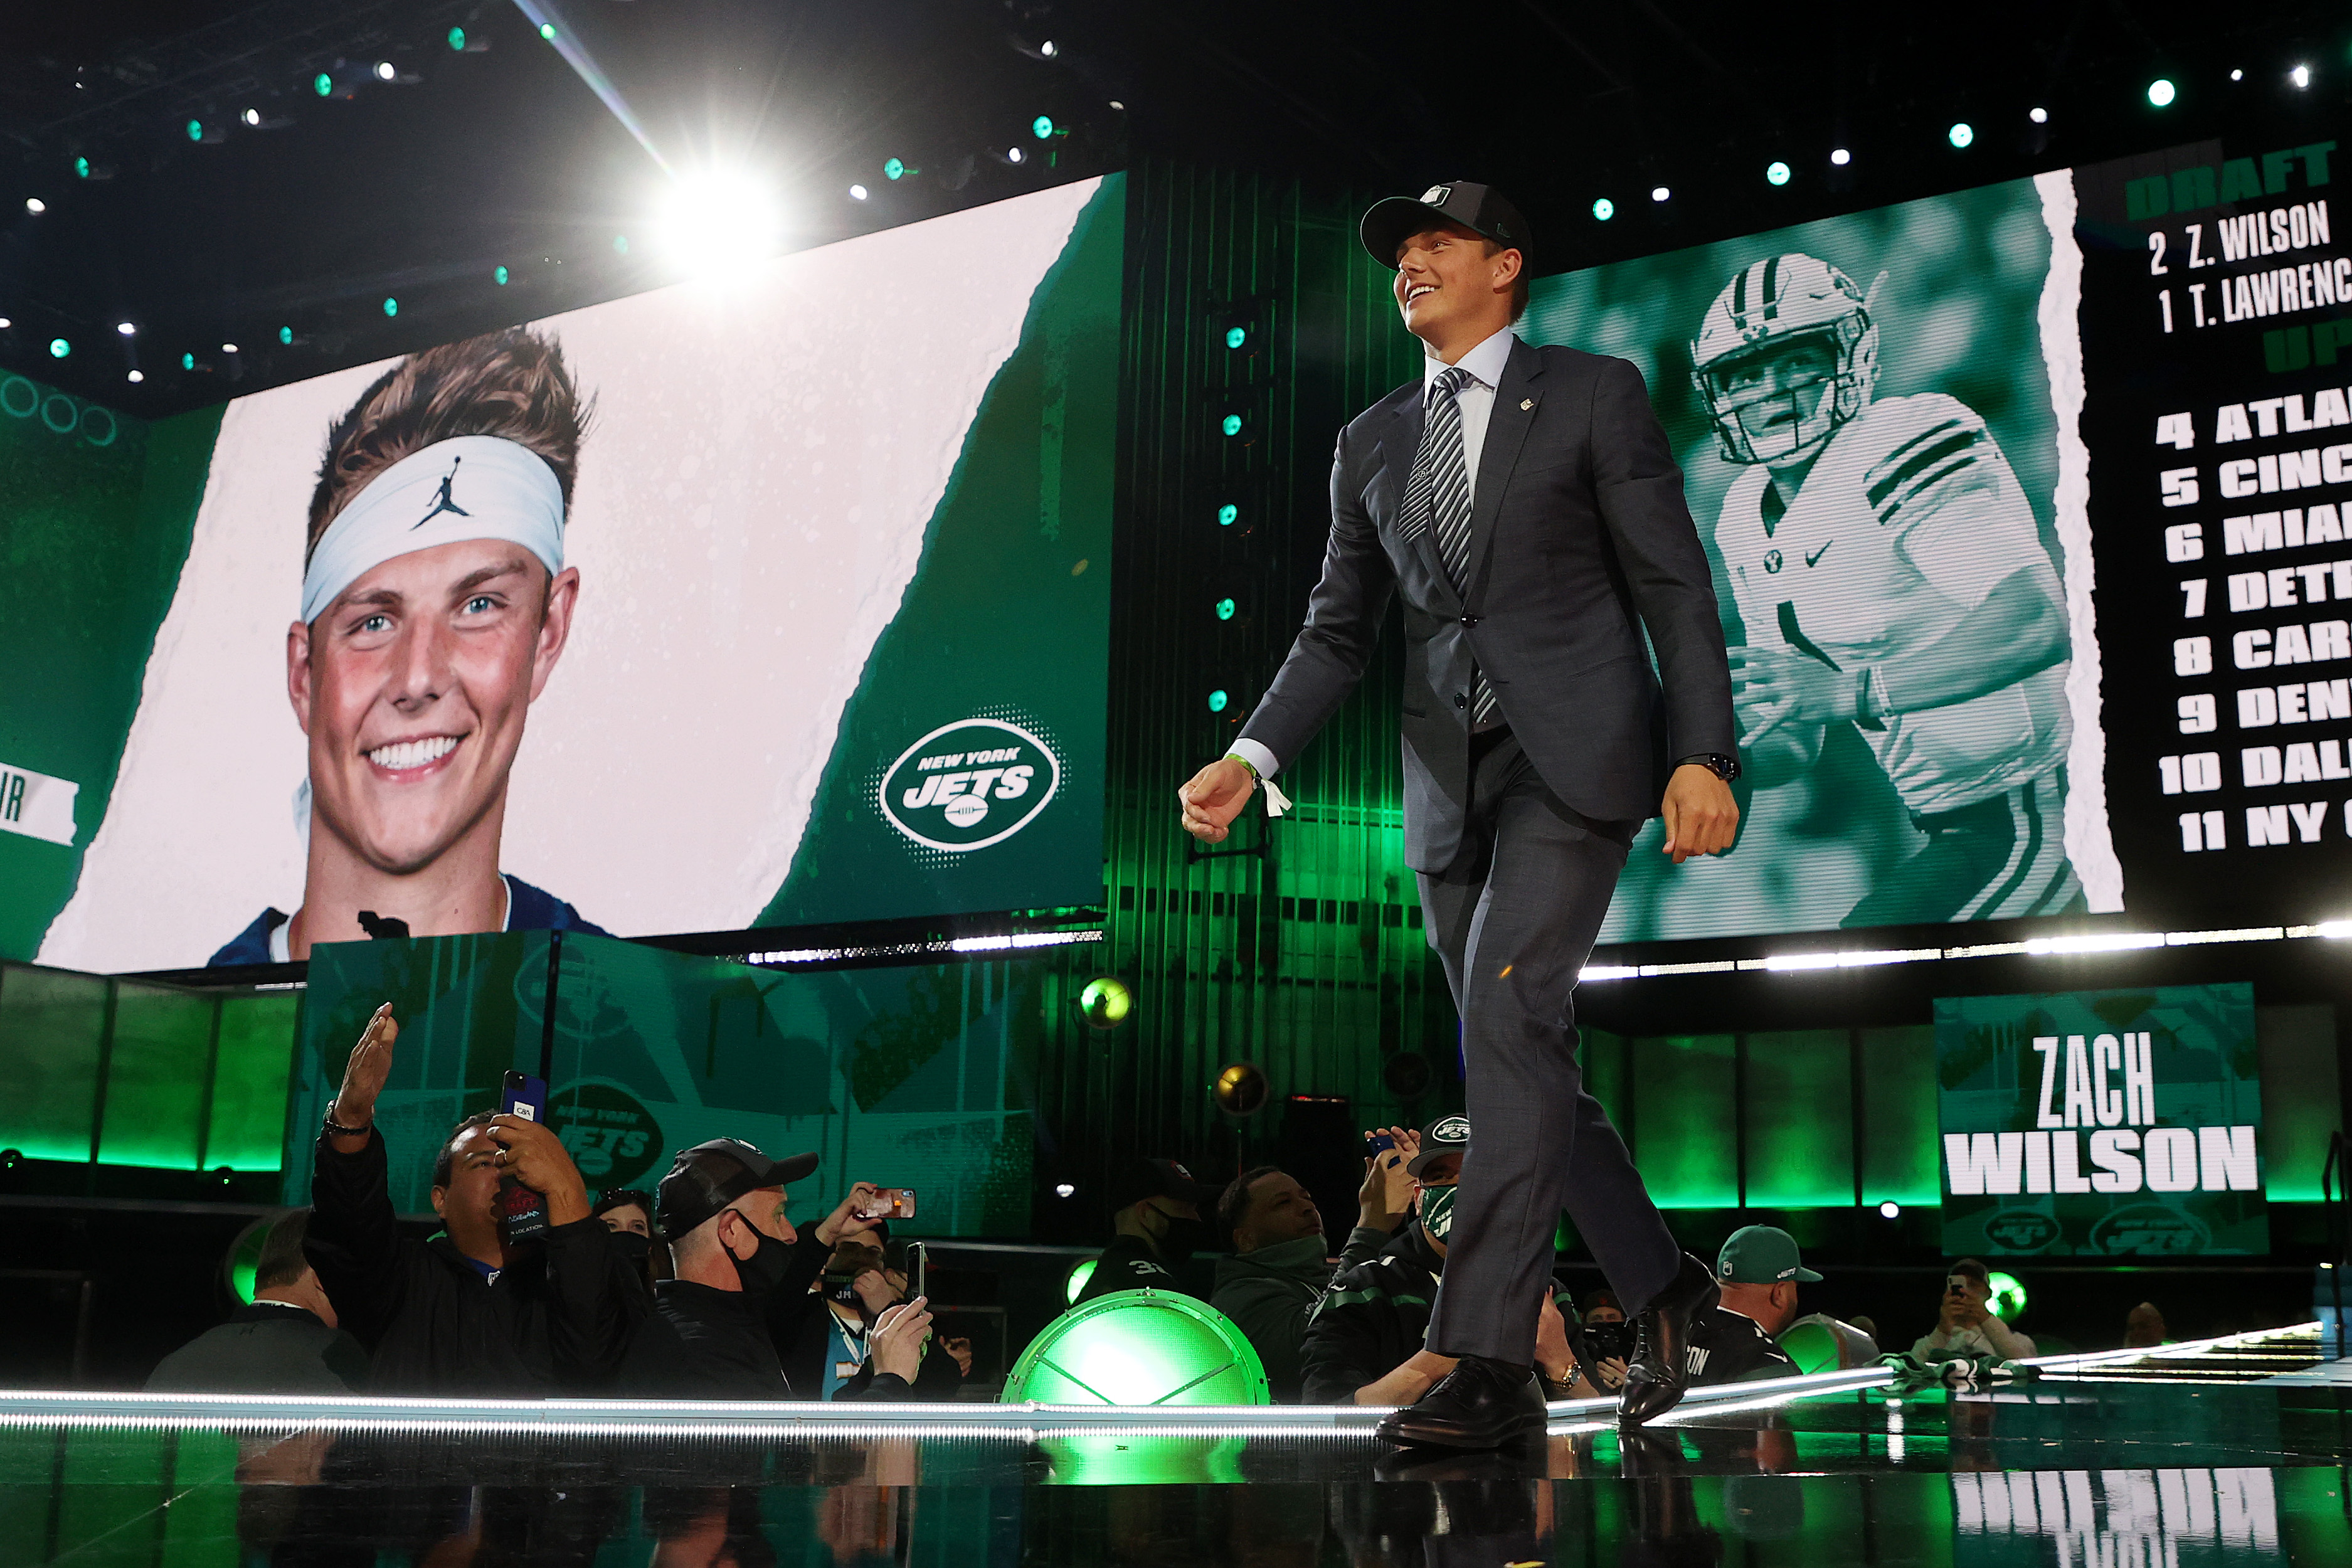 Zach Wilson walks onstage after being drafted second by the New York Jets during round one of the 2021 NFL Draft.